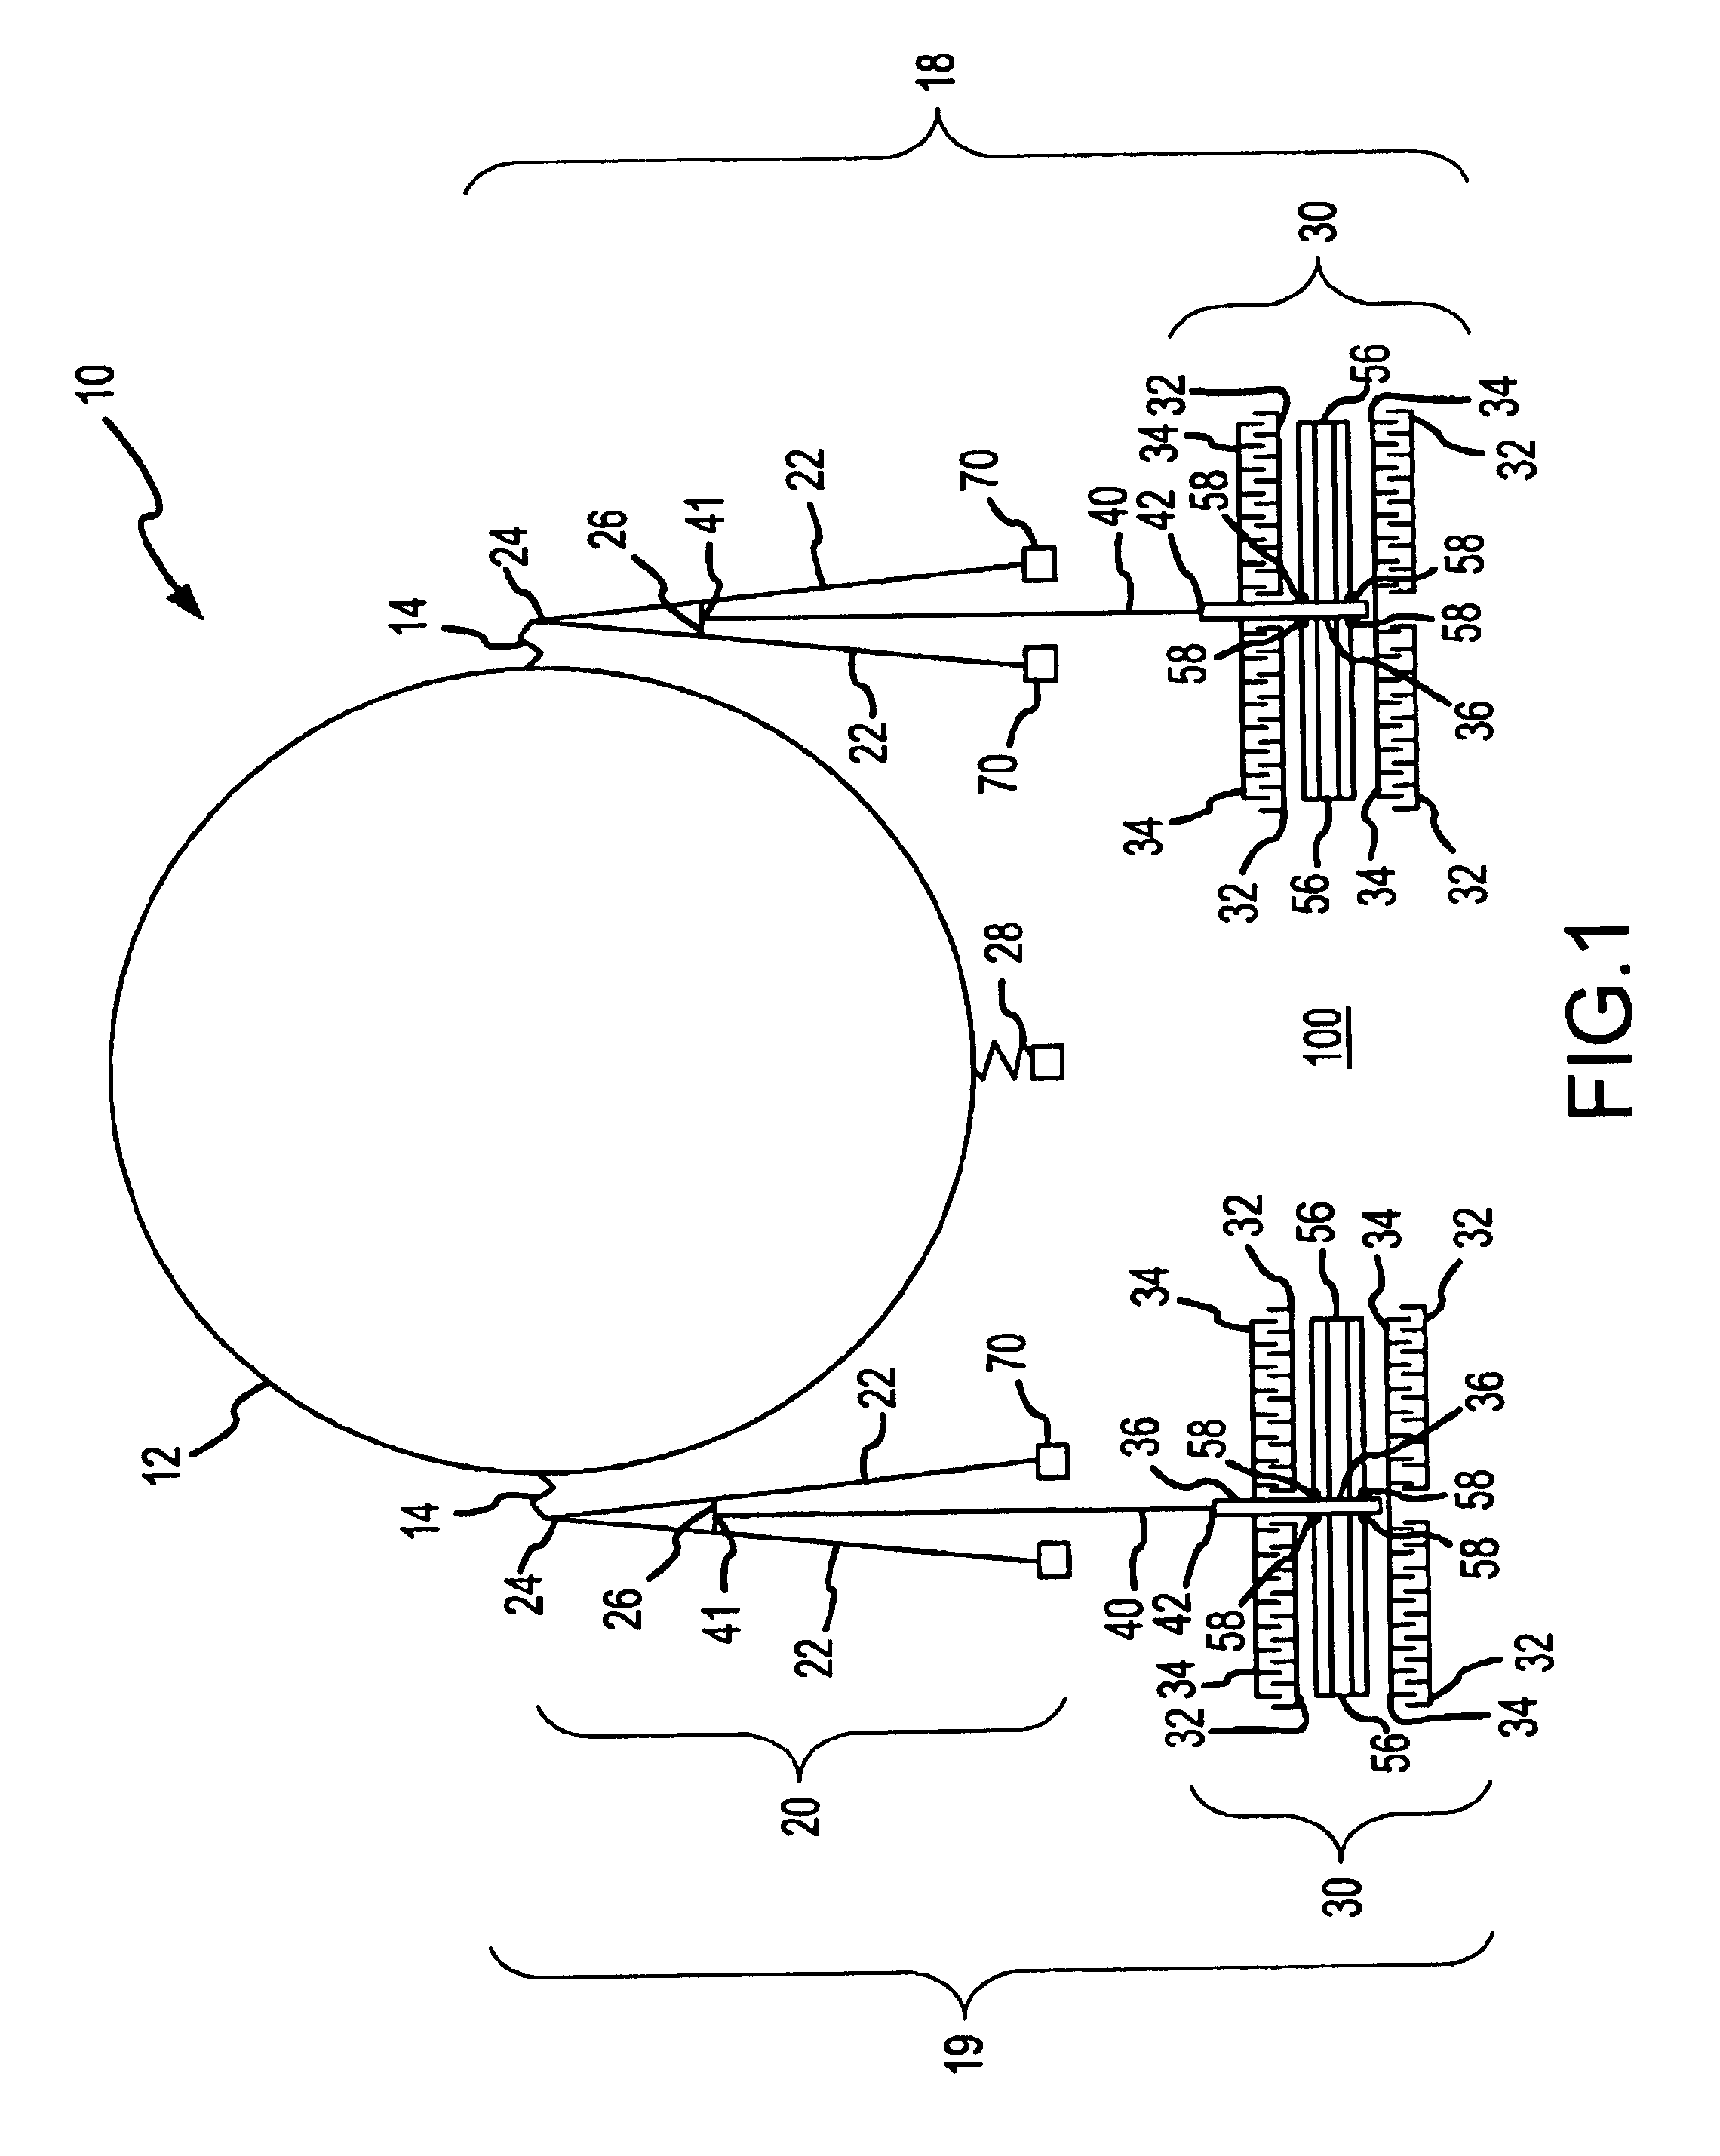 Method for operating a microelectromechanical system using a stiff coupling